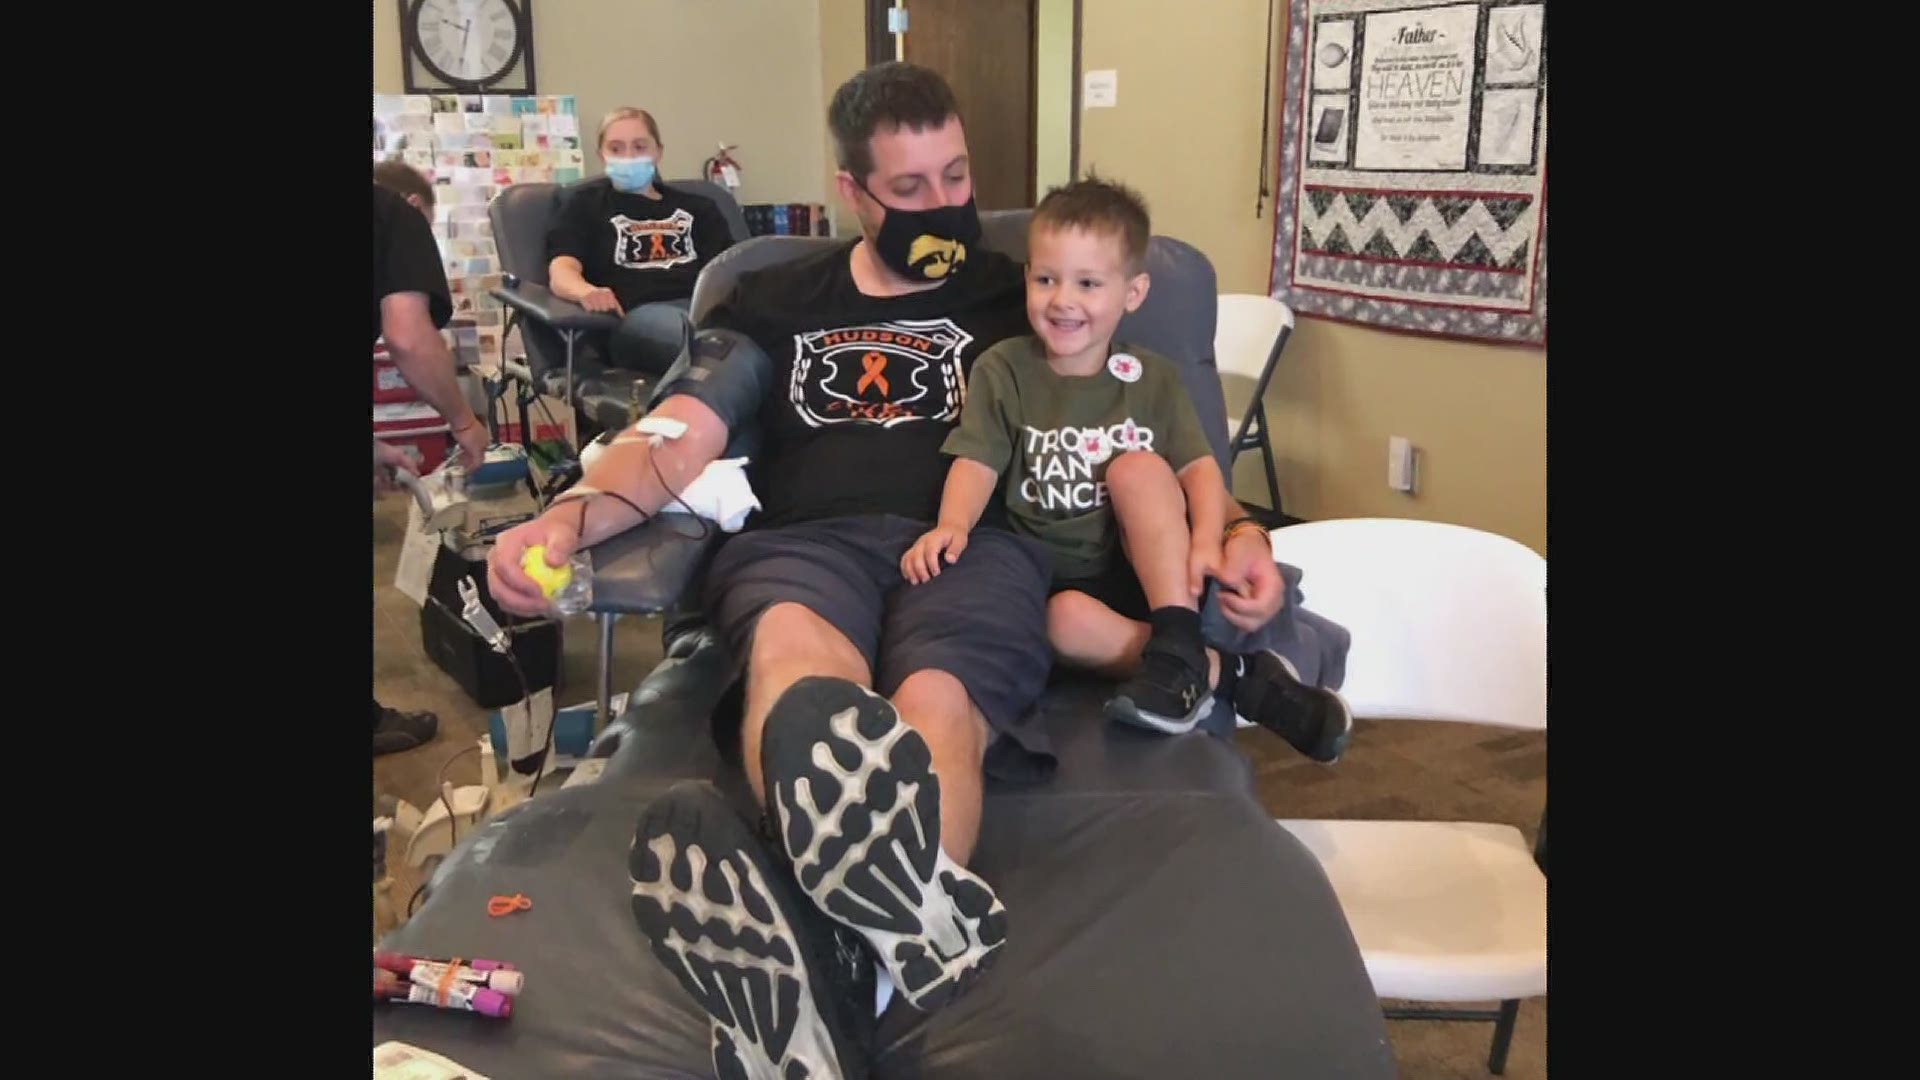 After multiple life-saving blood transfusions, Hudson McKearney is in remission from his cancer. But his parents say, blood donation is more important than ever.